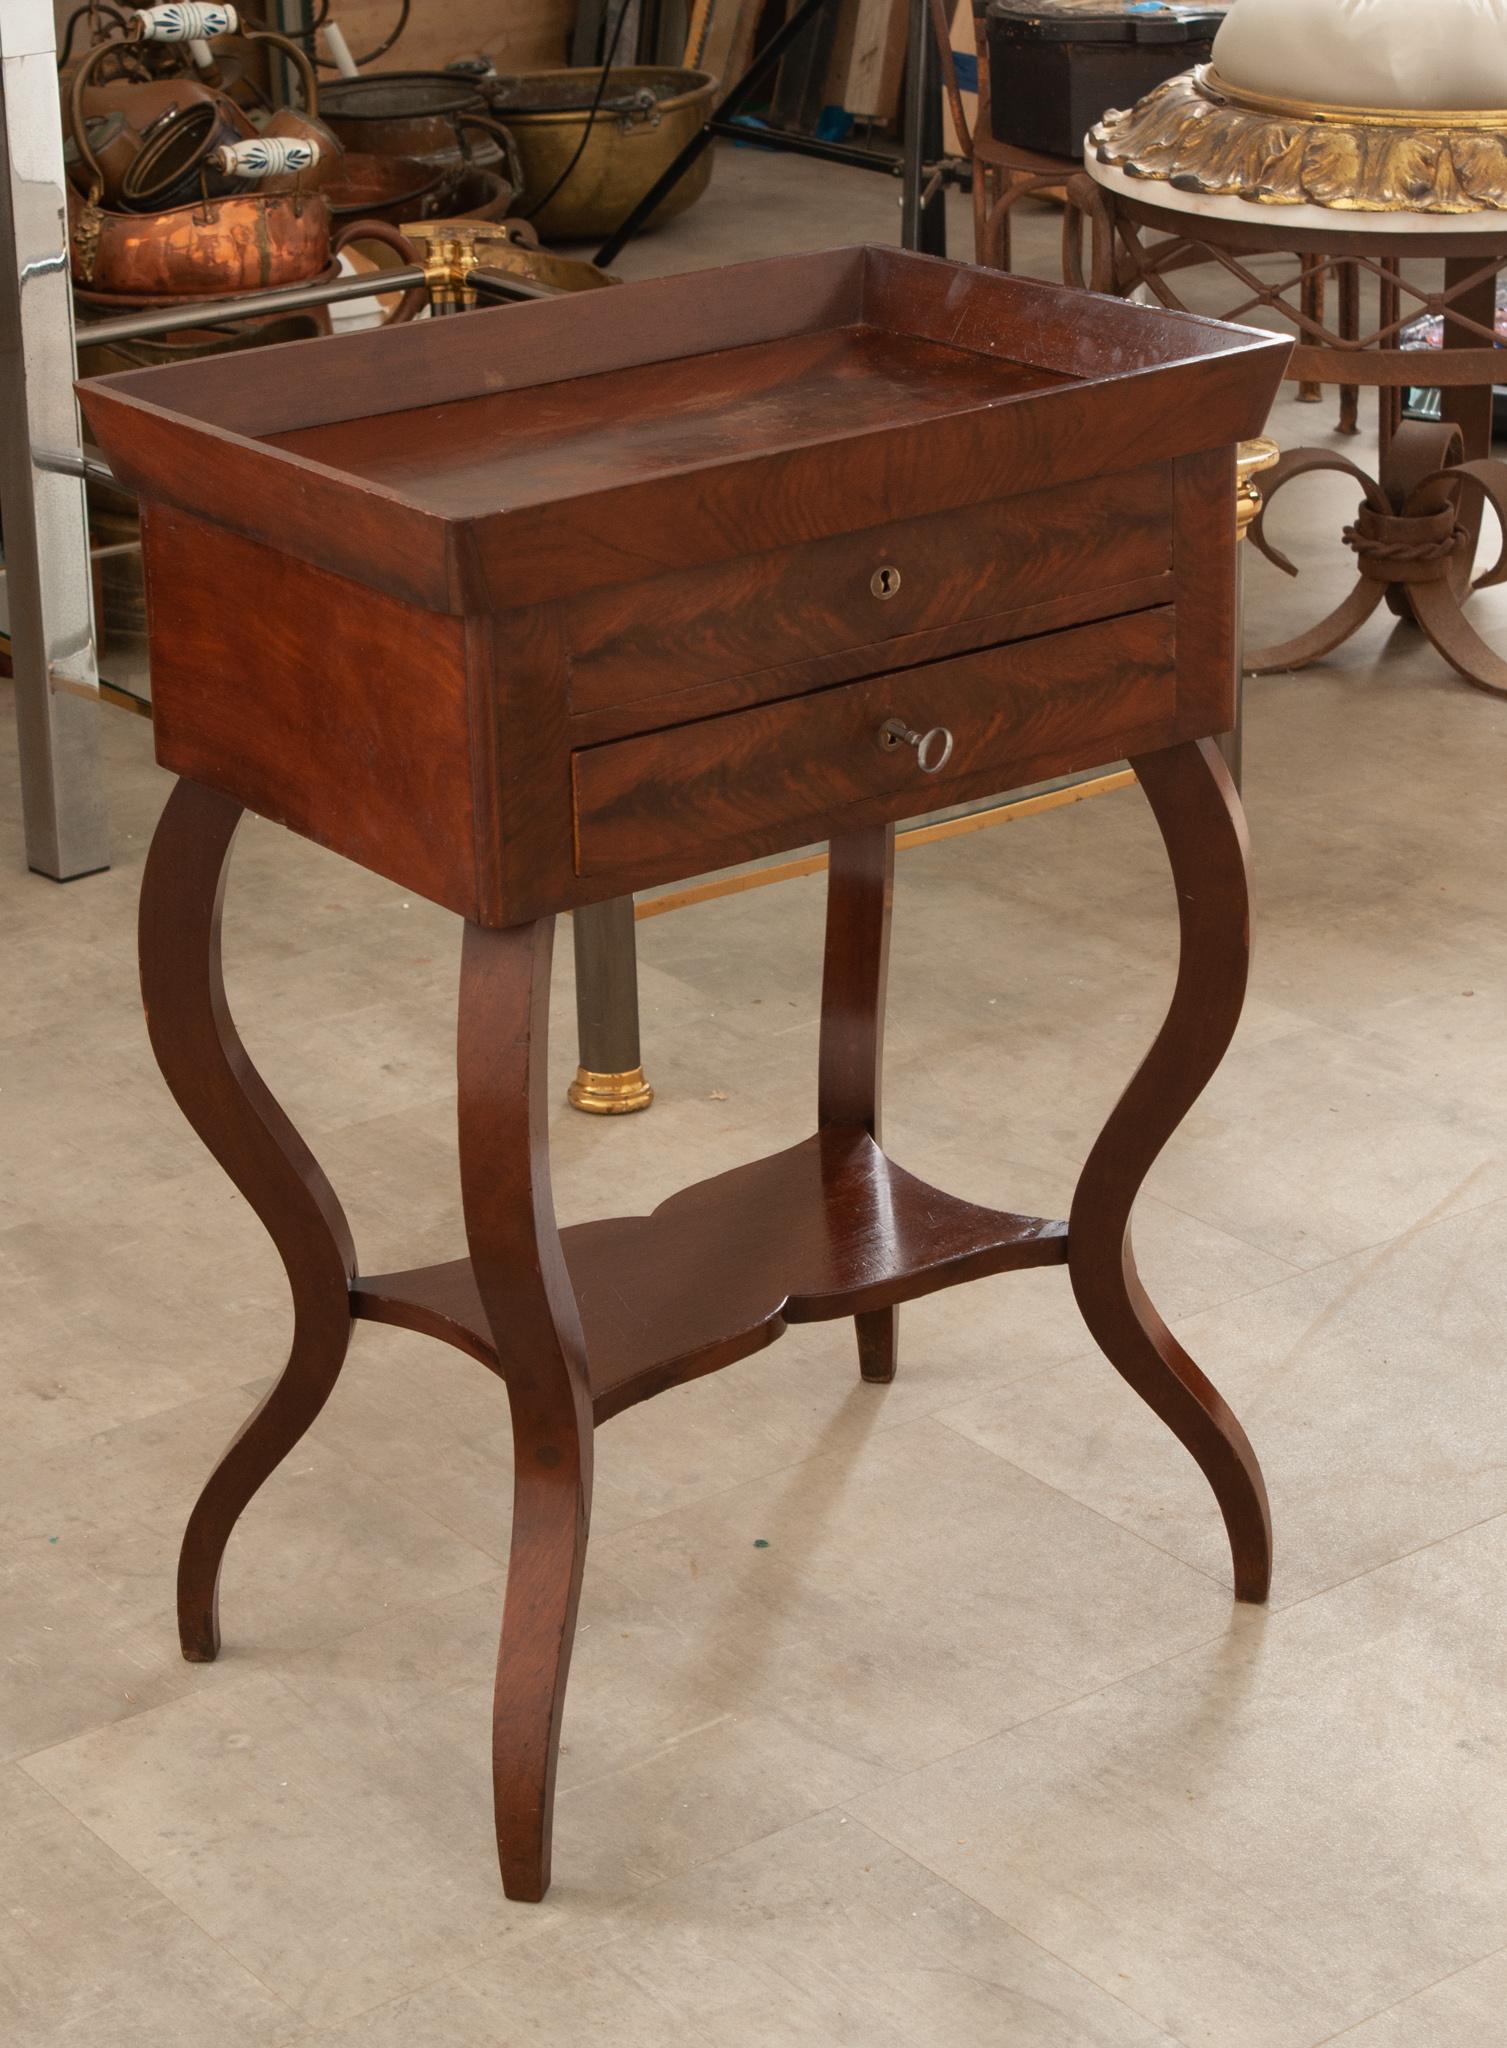 This fabulous little table was crafted in the 1850s from richly toned and bookmatched mahogany. The beveled top resembles a tray and is perfect for a small entryway or next to a sofa. Two drawers are housed within the apron; the top lock no longer